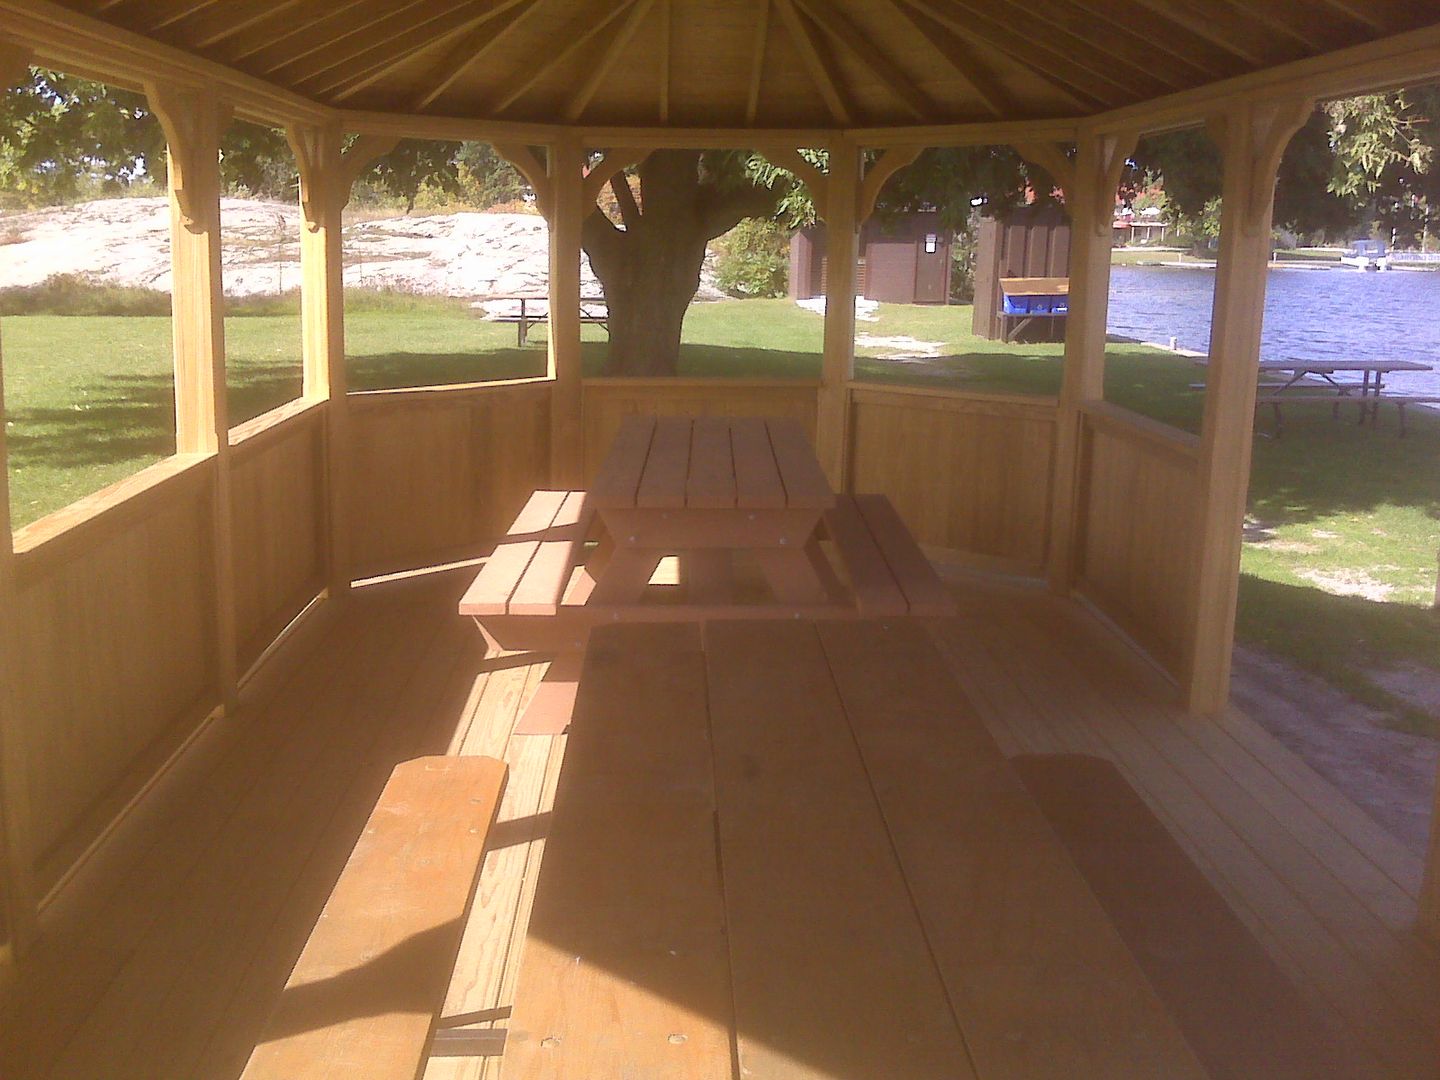 wooden 12 by 24 foot oval gazebo interior